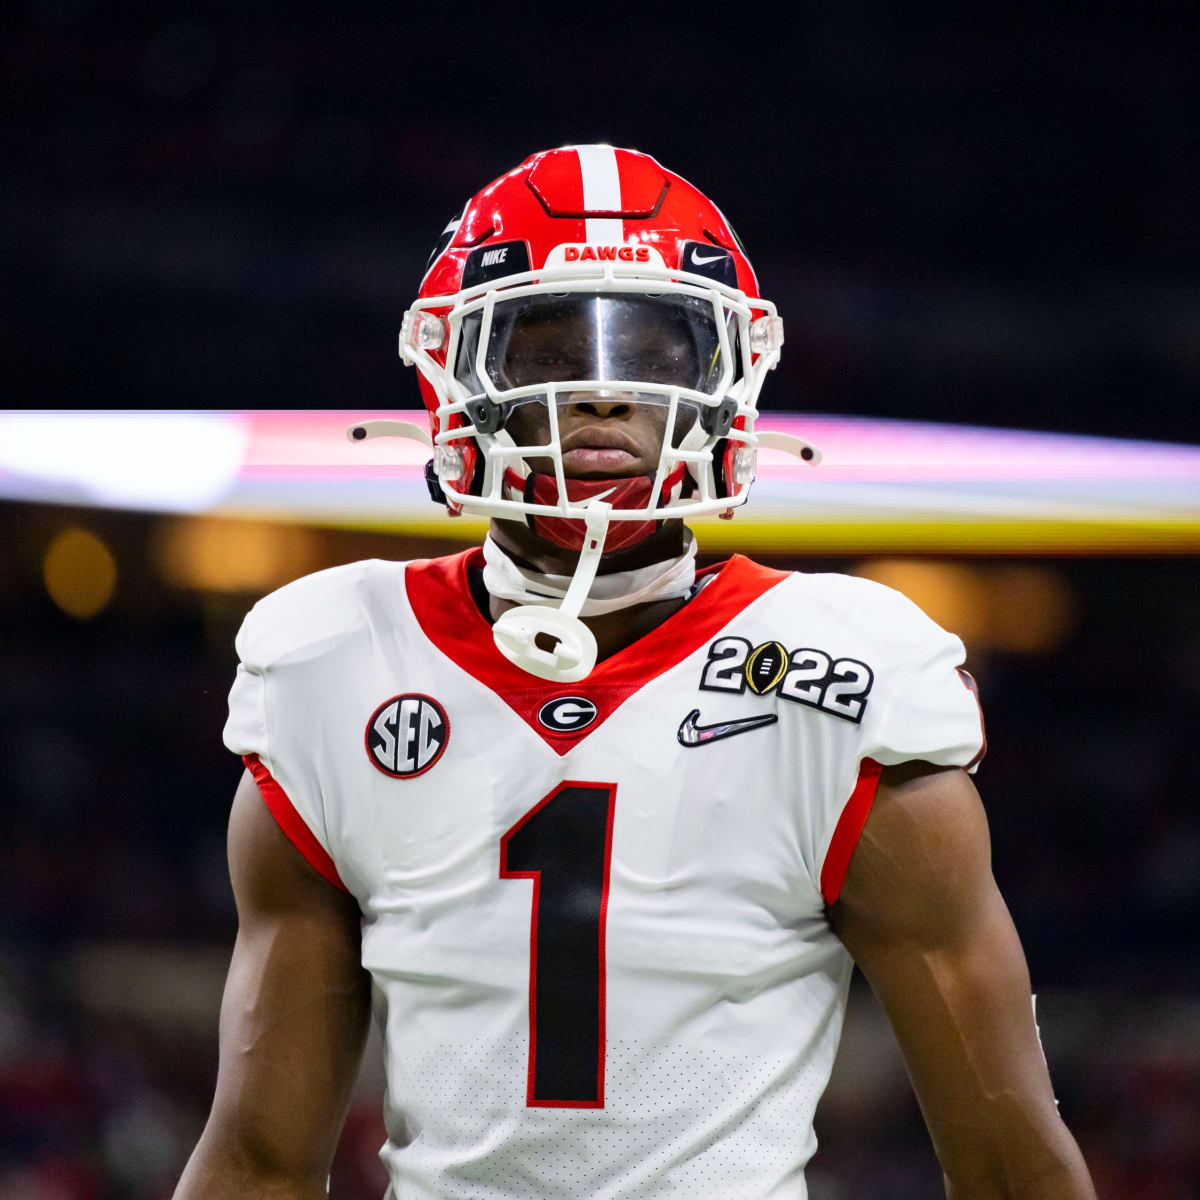 NFL Draft: Pittsburgh Steelers Select a WR in 2nd Round - Visit